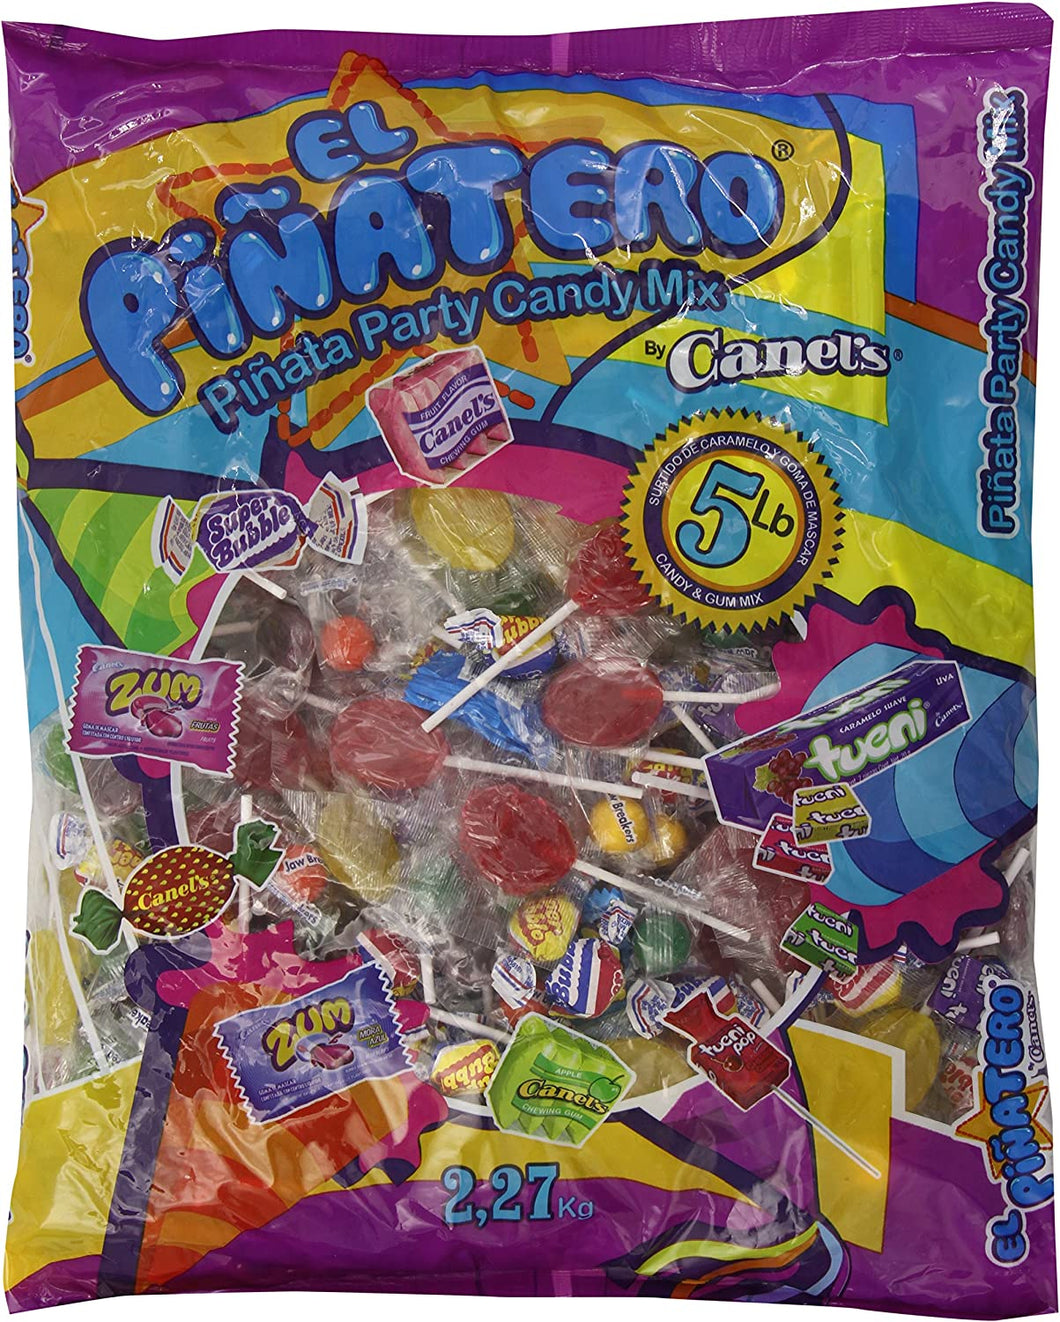 Canel's El Pinatero Pinata Candy Mix, 5 Pound by Canel's